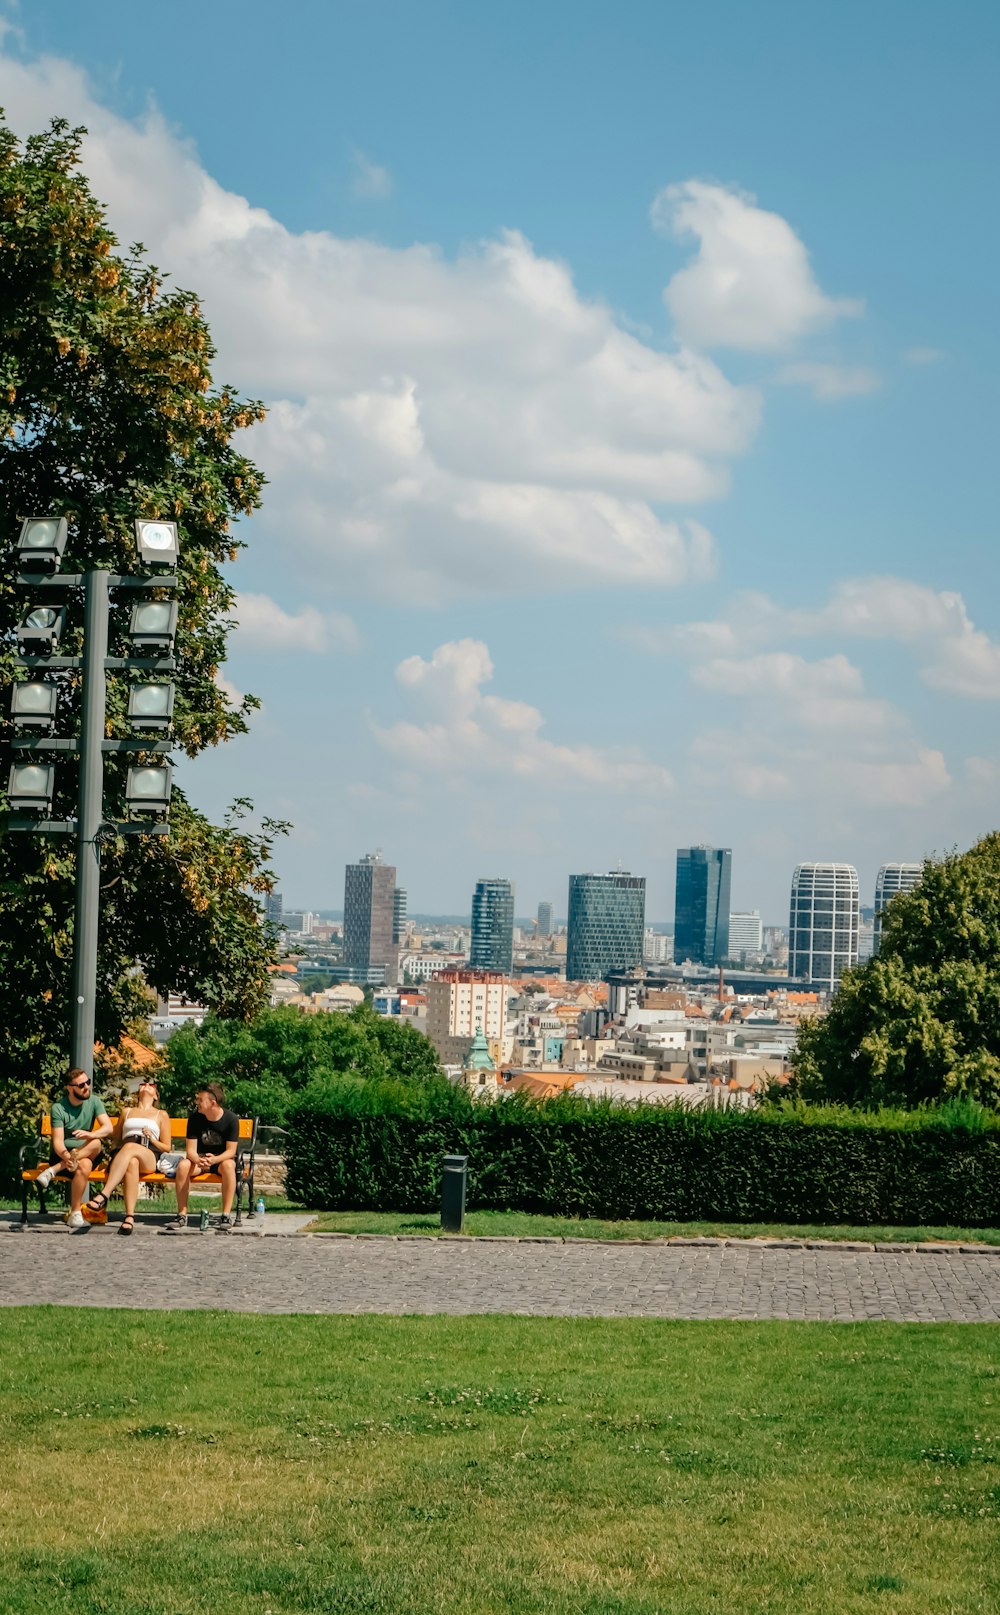 a group of people sitting on a bench in a park with a city in the background